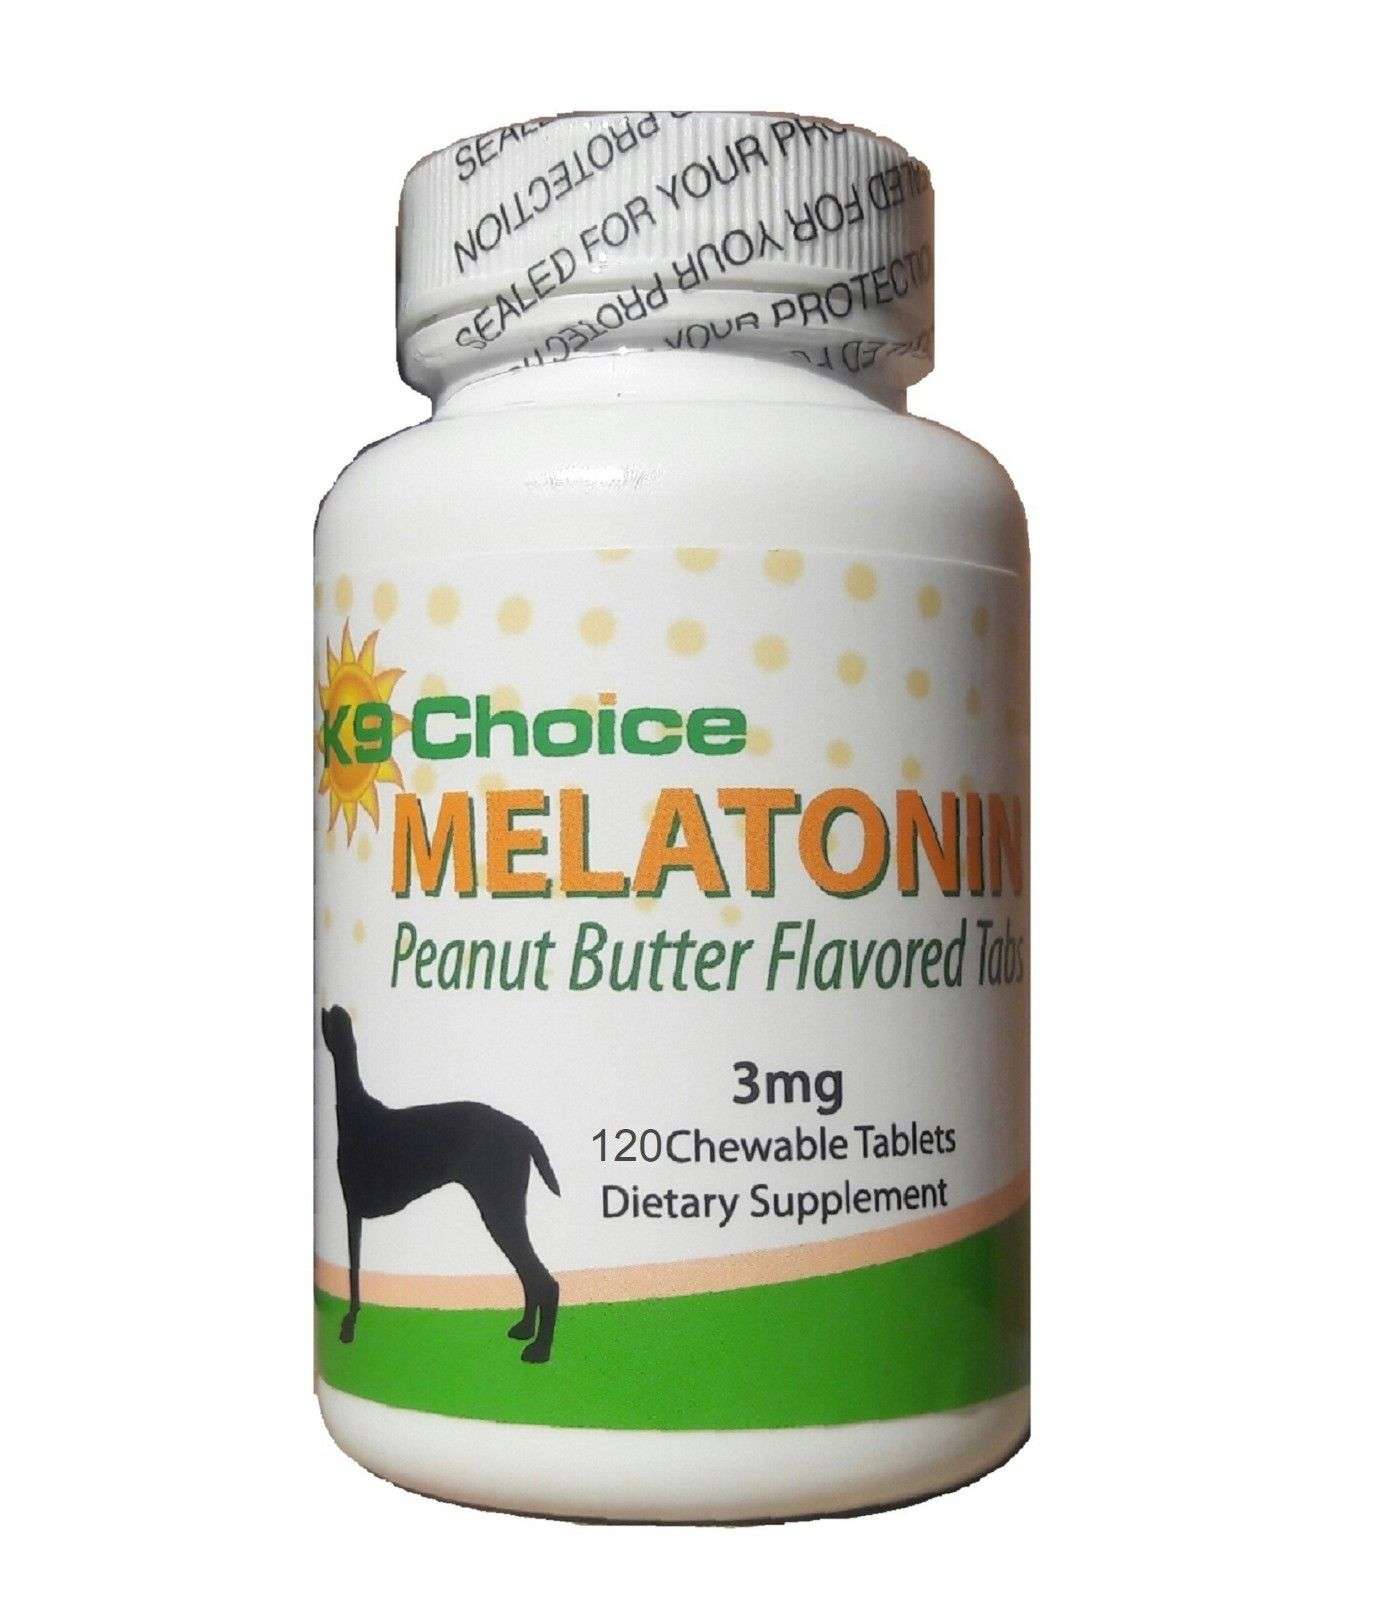 Is Melatonin Safe for dogs as a sleeping aid?